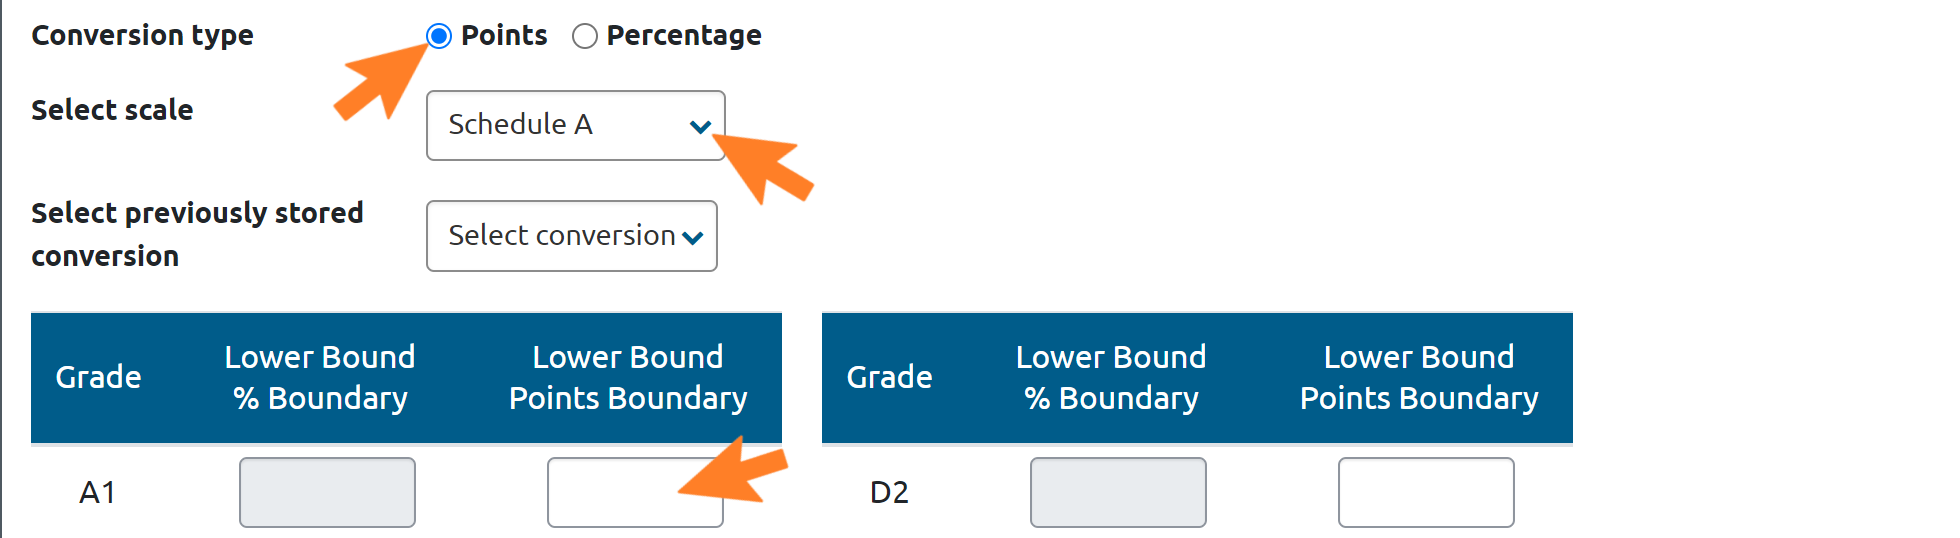 Grade conversion screen, with 'Conversion type' radio button options highlighted, 'Select Scale' drop down menu highlighted and 'Lower Bound Points Boundary' field highlighted